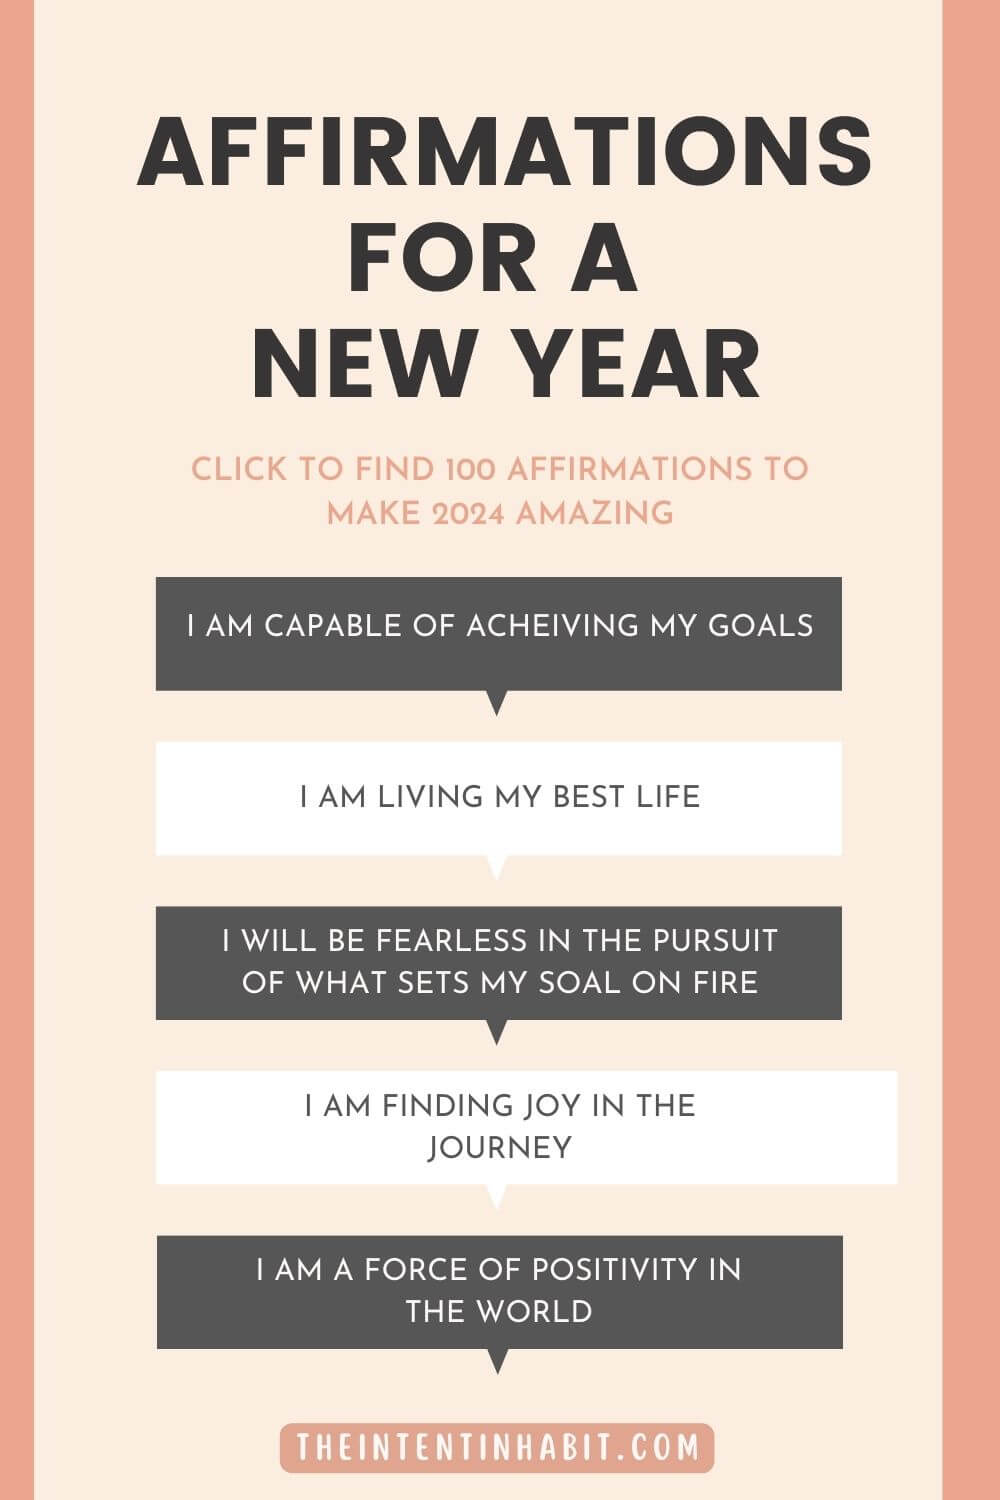 affirmations for a new year.